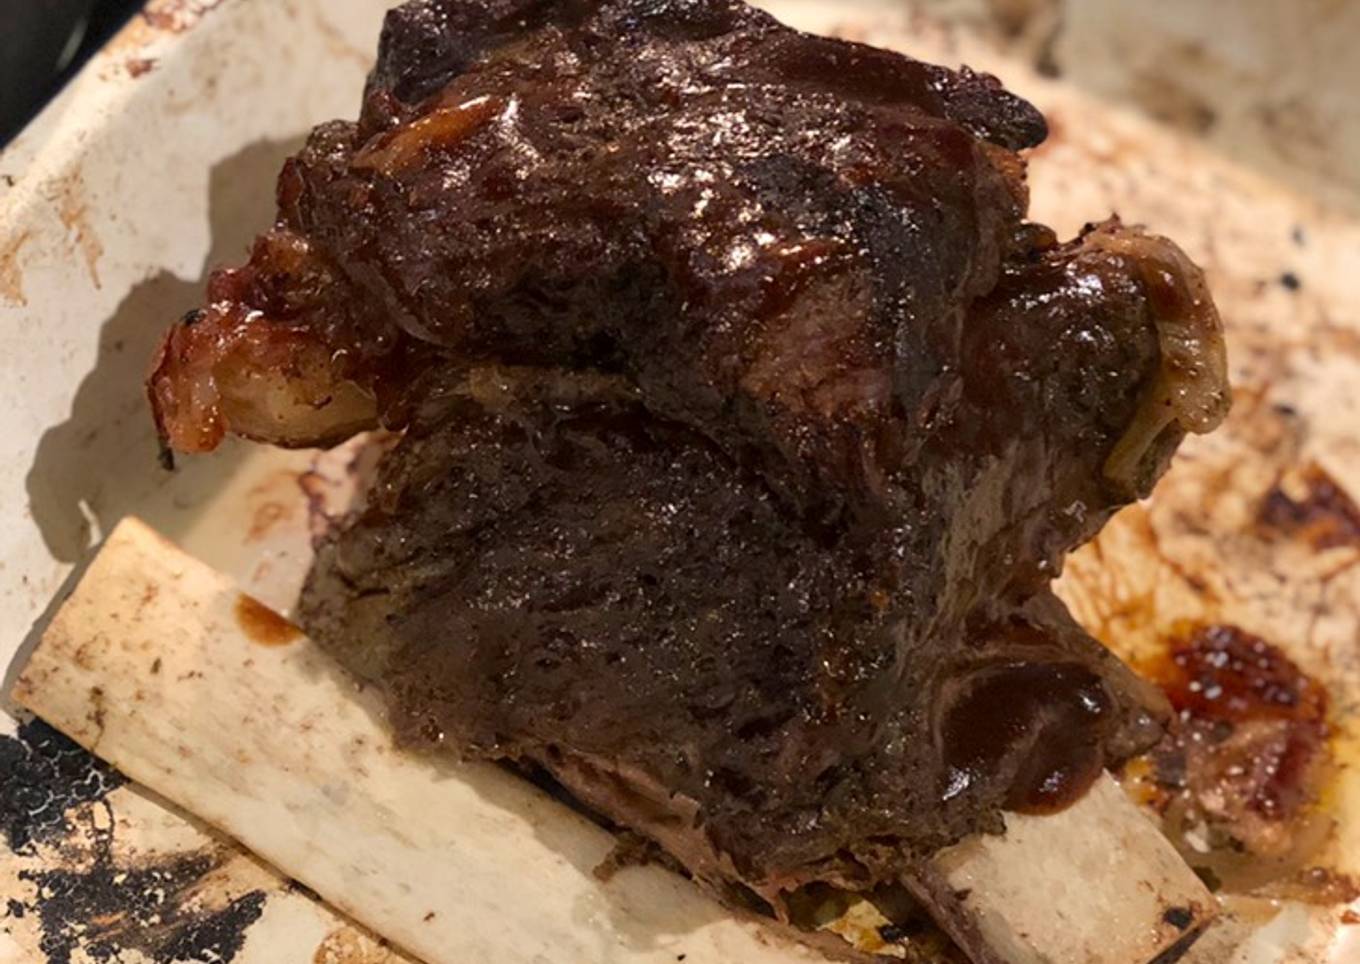 Slow cooked beef rib with a shallot and lemonade dripping